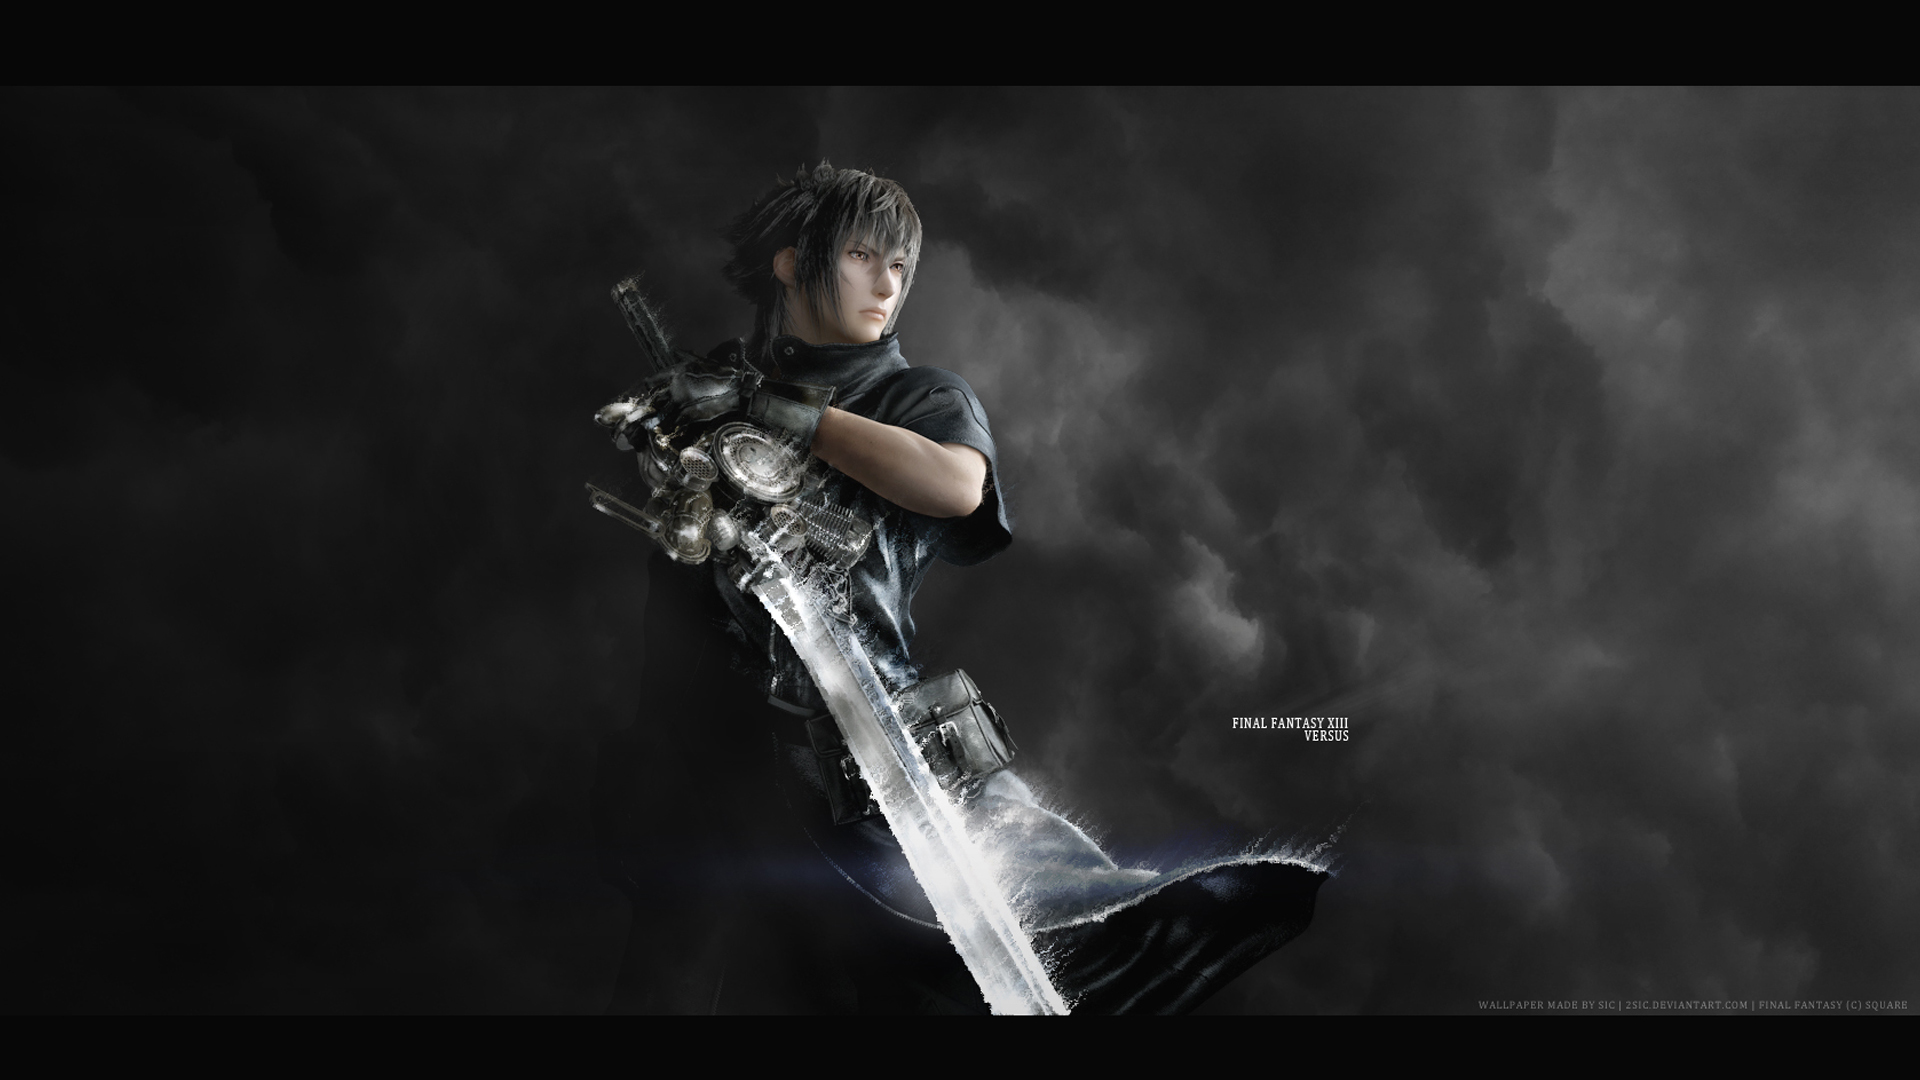 Free Download Final Fantasy Xv Wallpapers And Images Wallpapers Pictures Photos 19x1080 For Your Desktop Mobile Tablet Explore 46 Final Fantasy 15 Wallpapers Final Fantasy Hd Wallpaper Final Fantasy